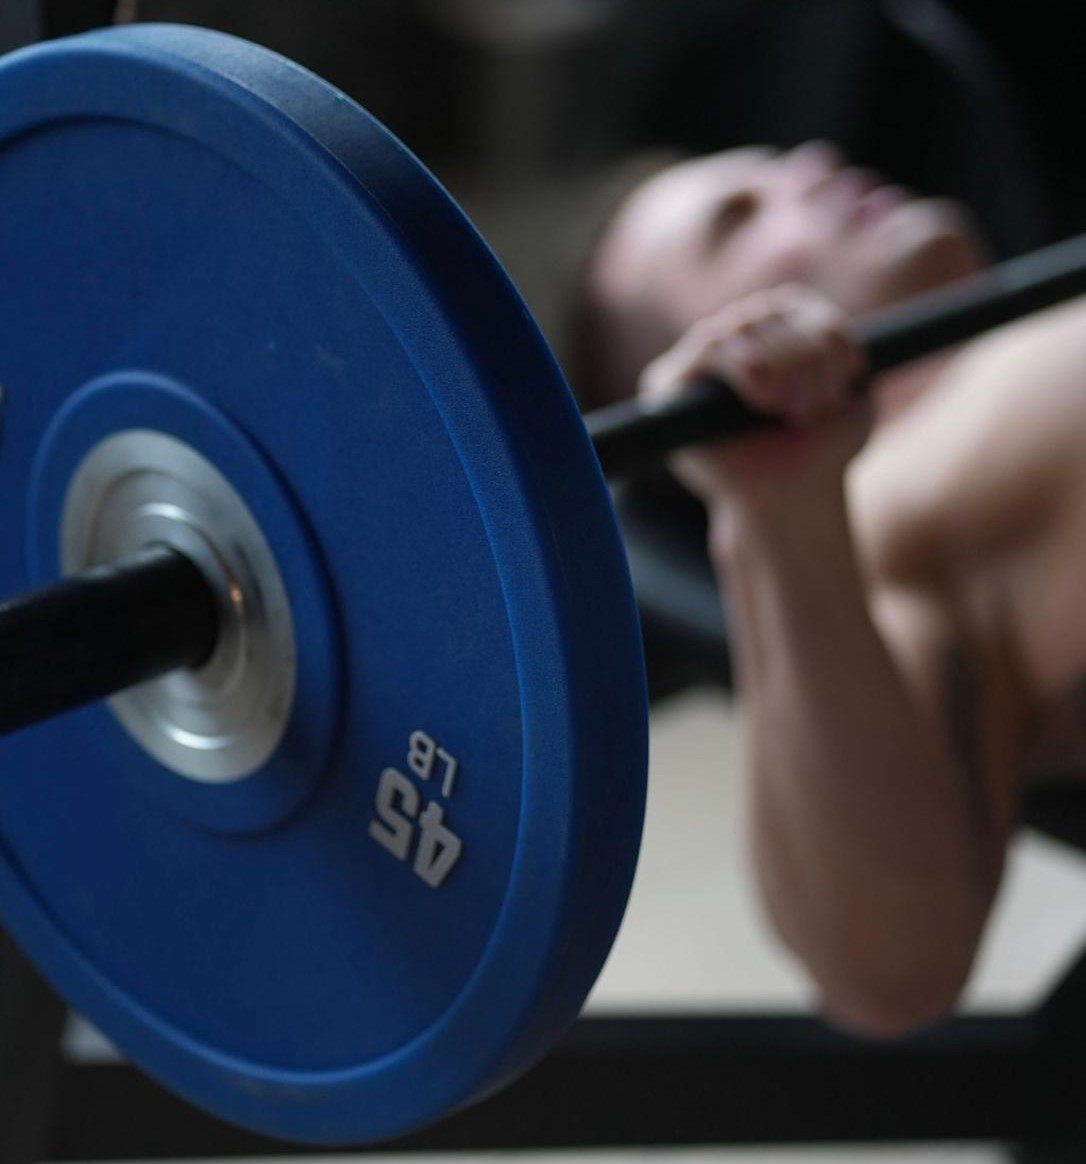 Keep track of the amount of weight you lift